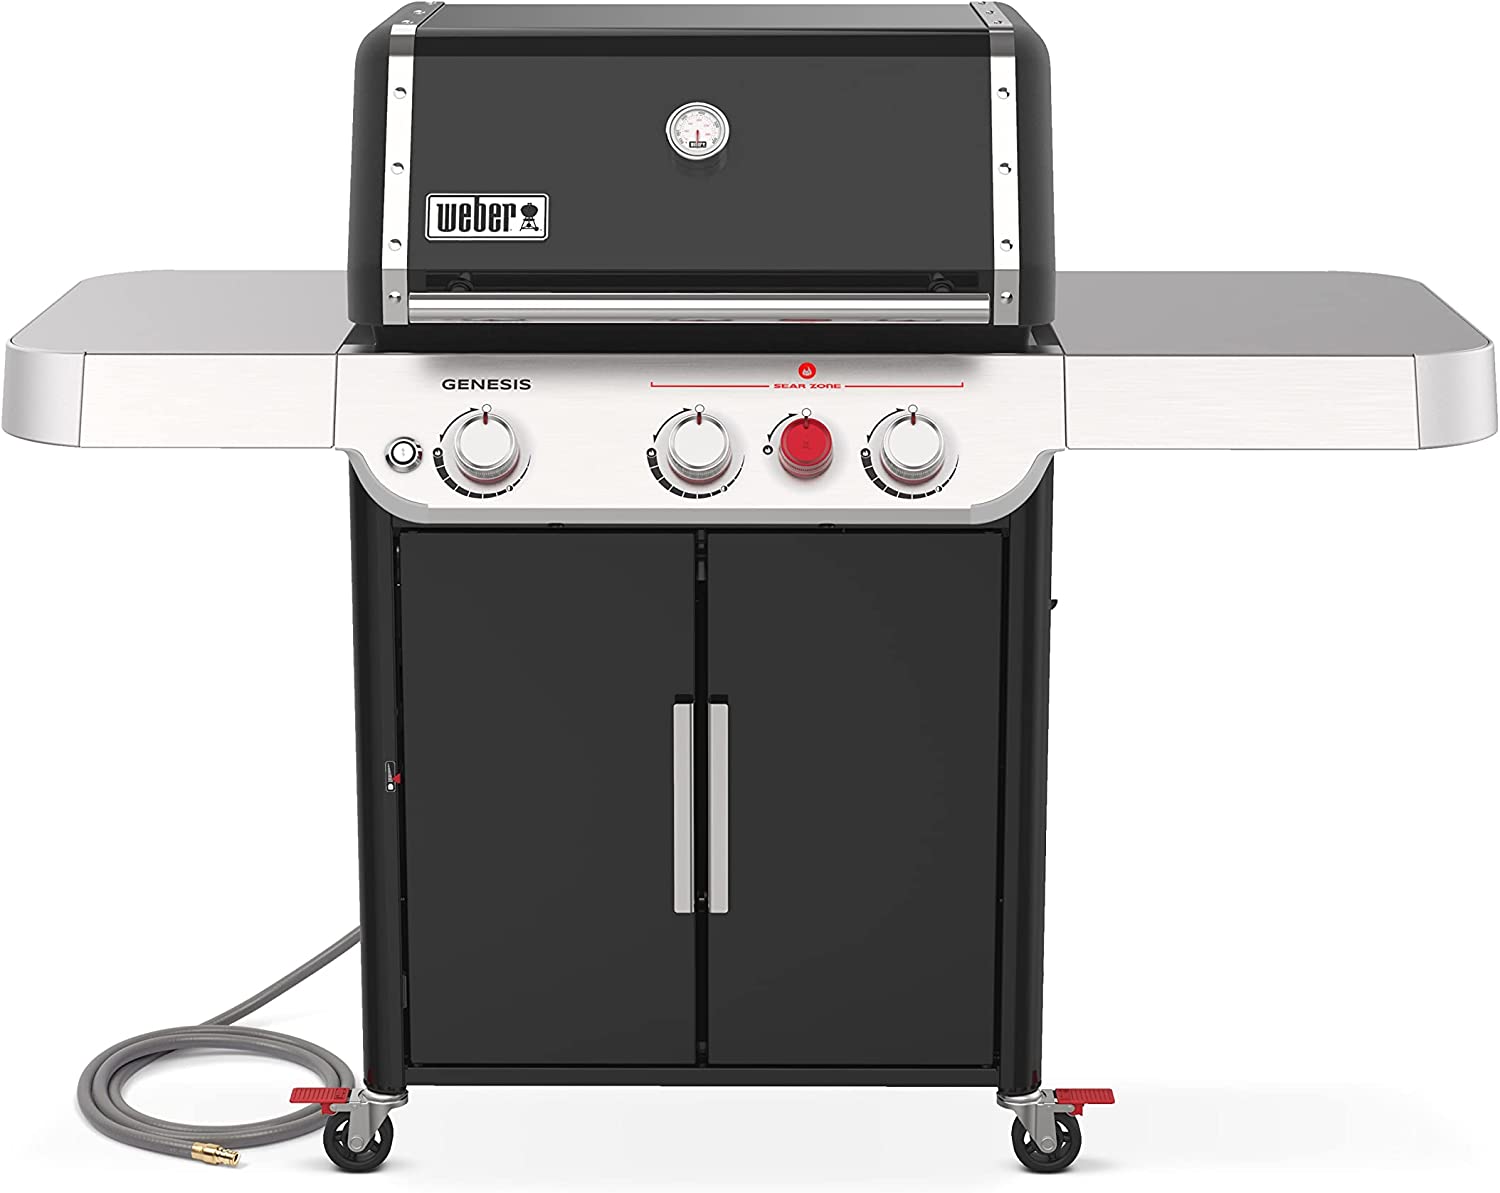 Weber Genesis E-325S Natural Gas Grill Review